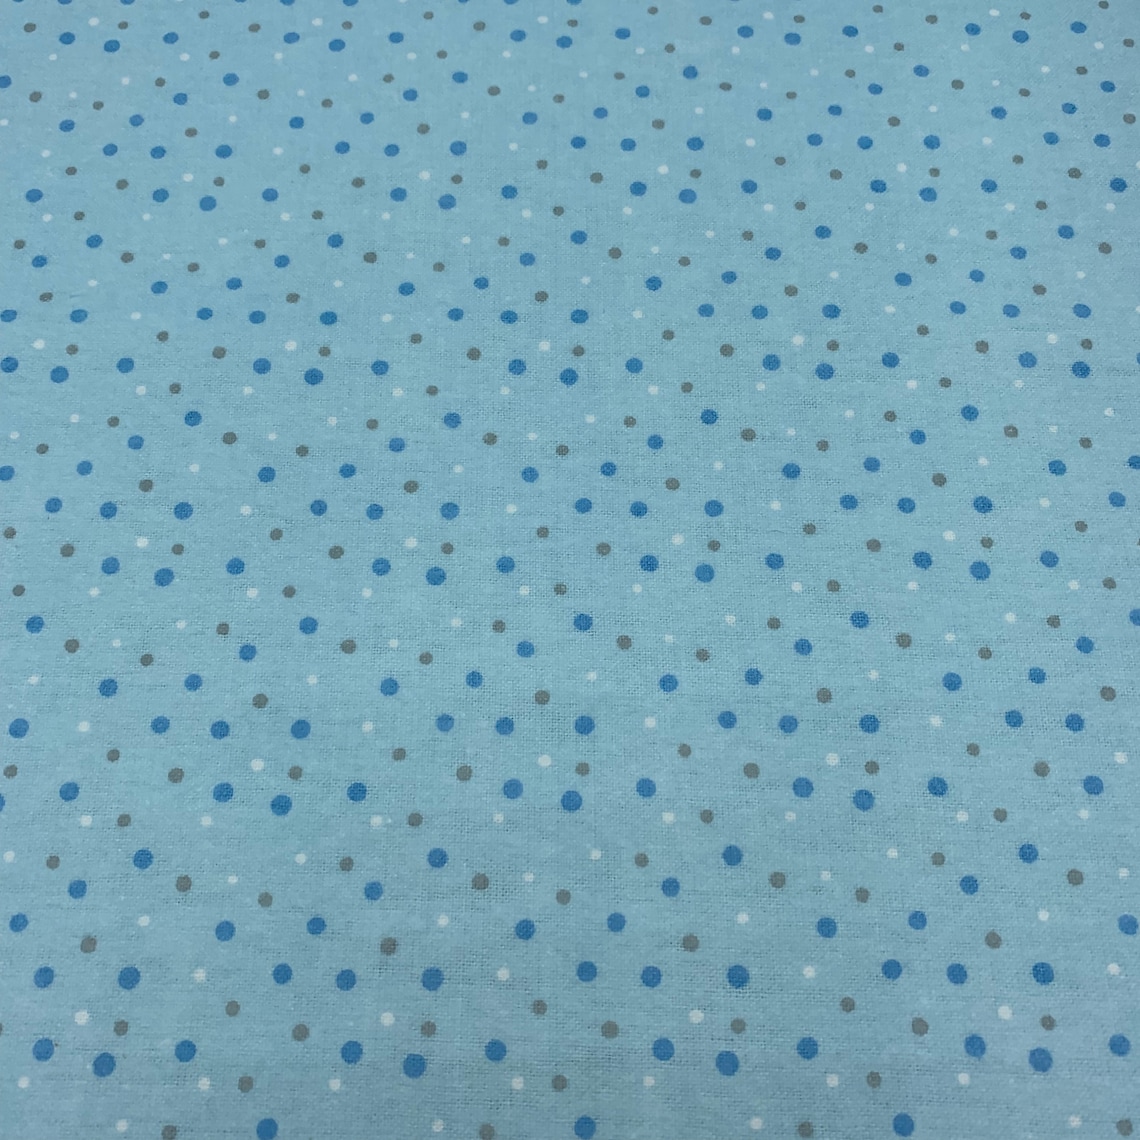 326 Flannel Fabric Blue With Gray White and Blue Polka Dots | Etsy